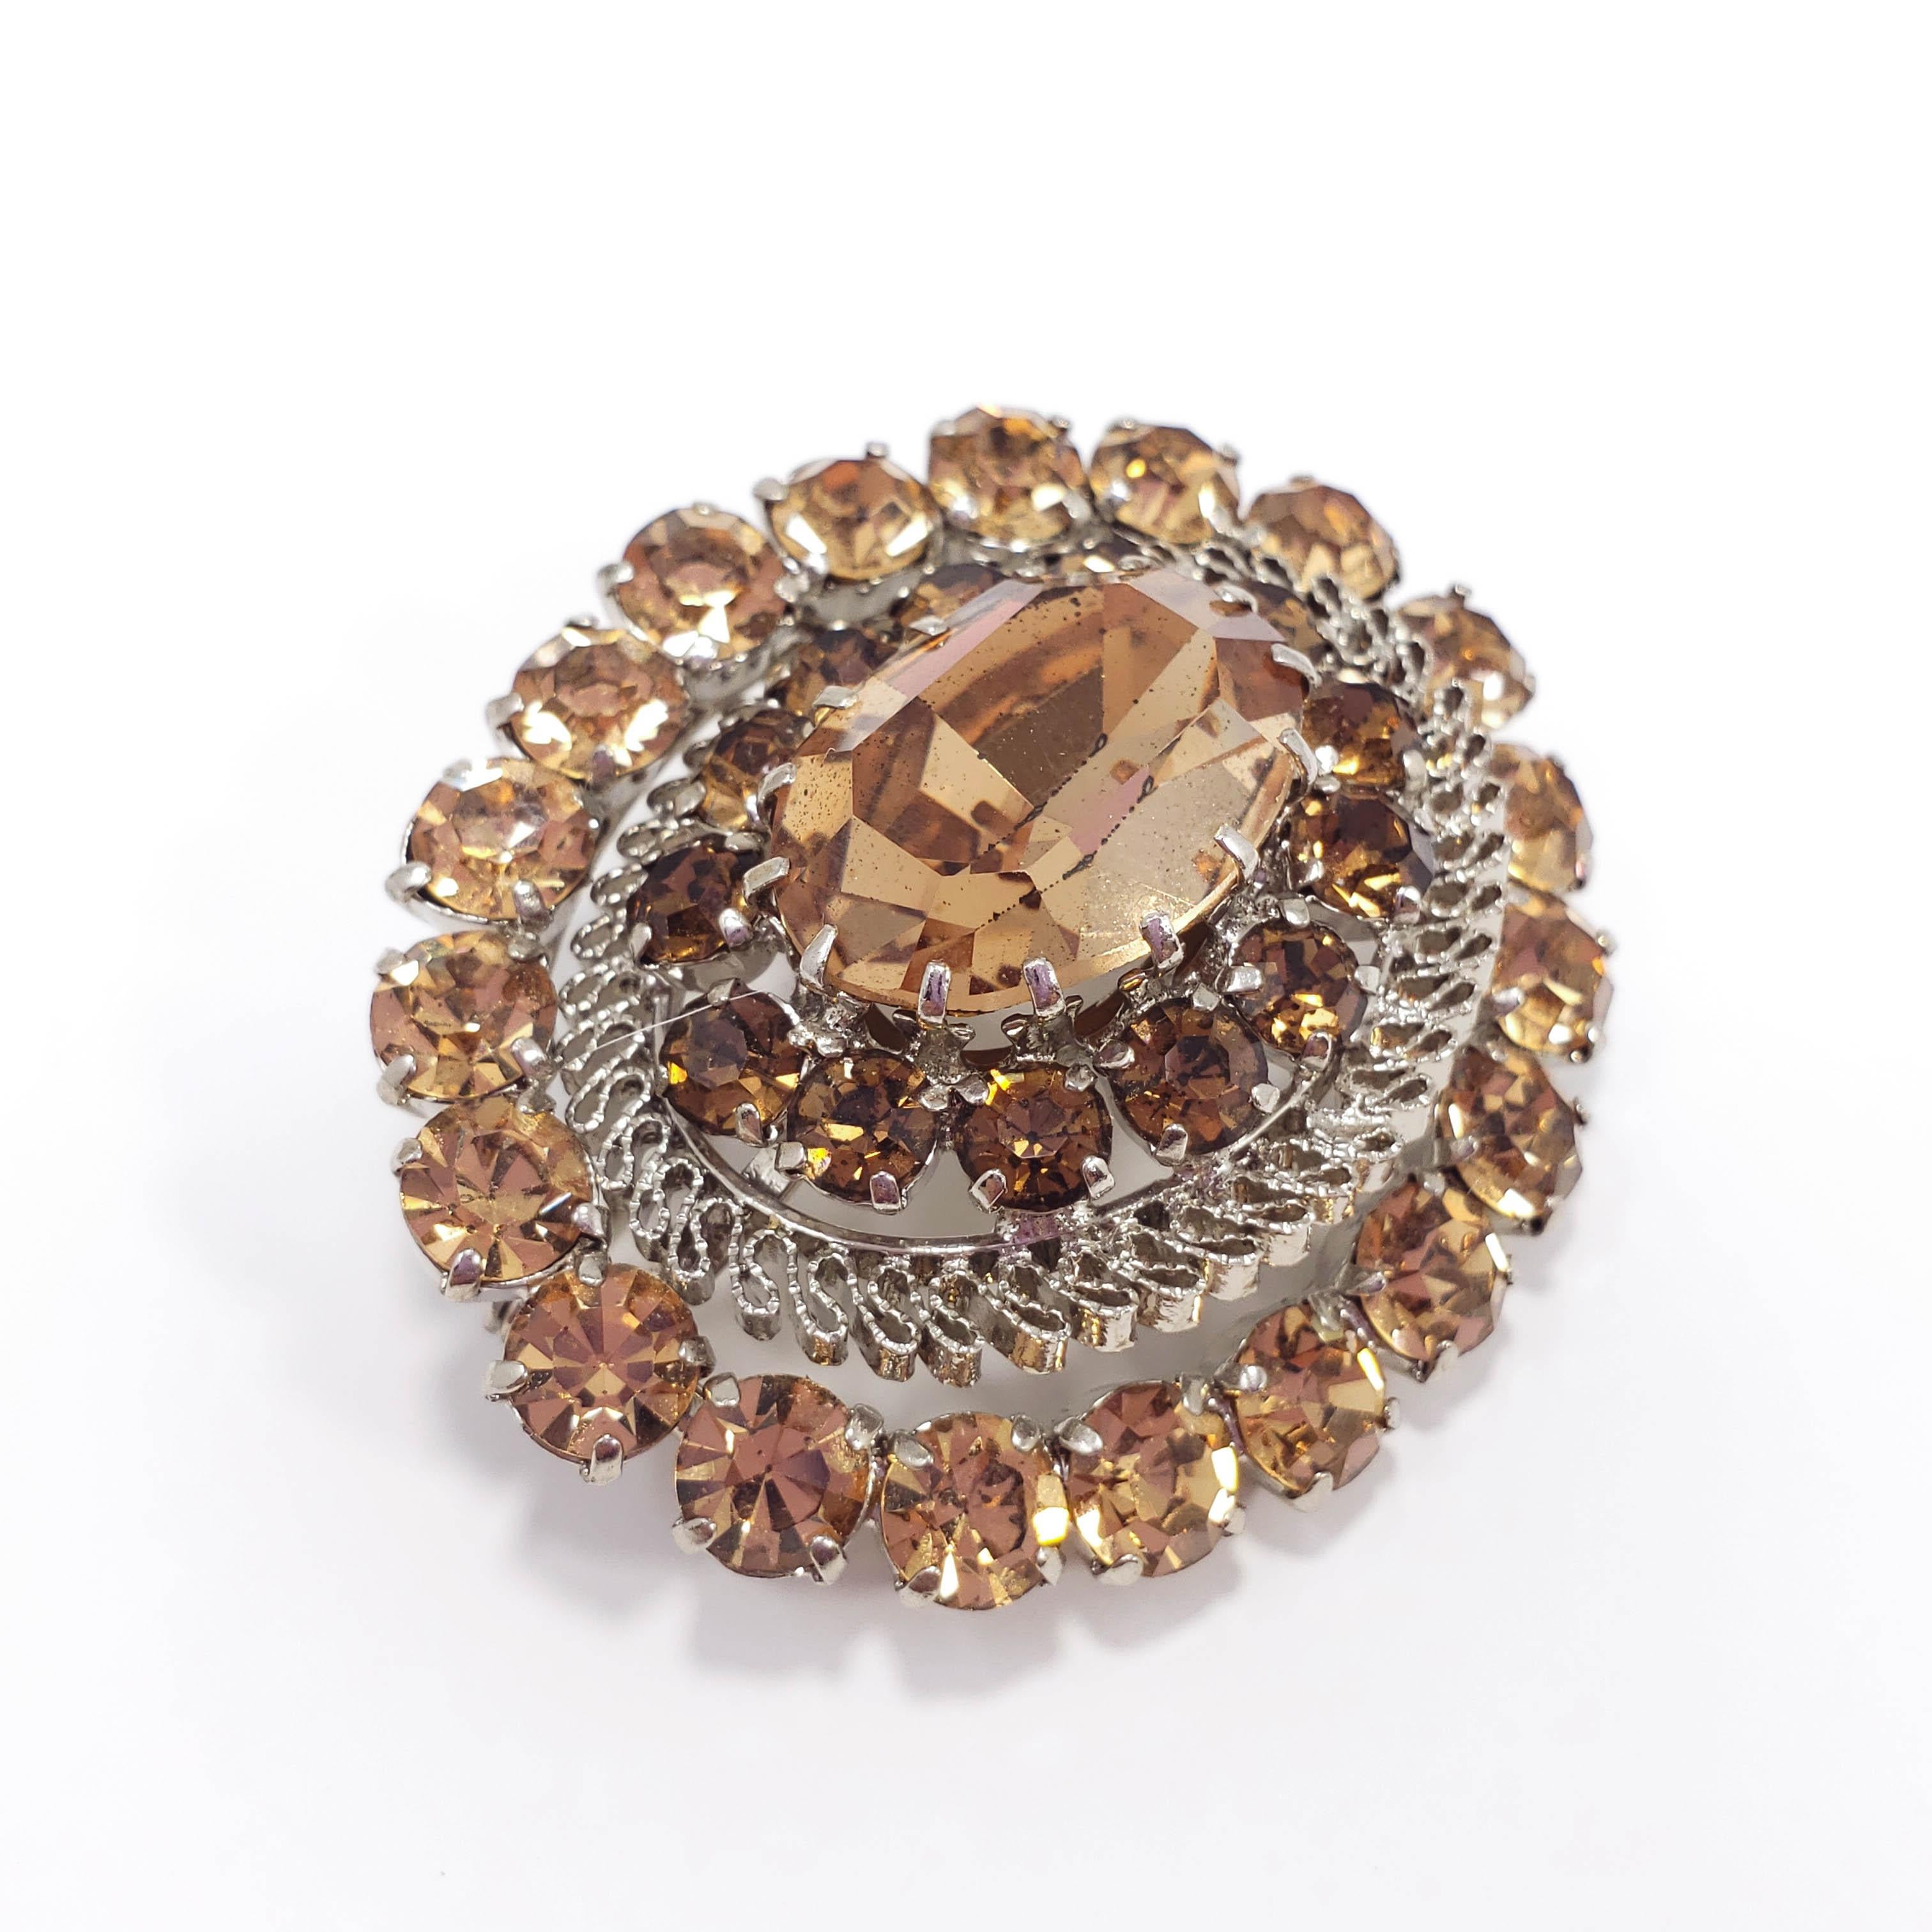 An elegant pin featuring a large centerpiece topaz-colored, open foiled-back crystal, prong-set in a silvertone setting and surrounding with smaller prong-set crystals and filigree accents. The center setting is angled back relative to the outer